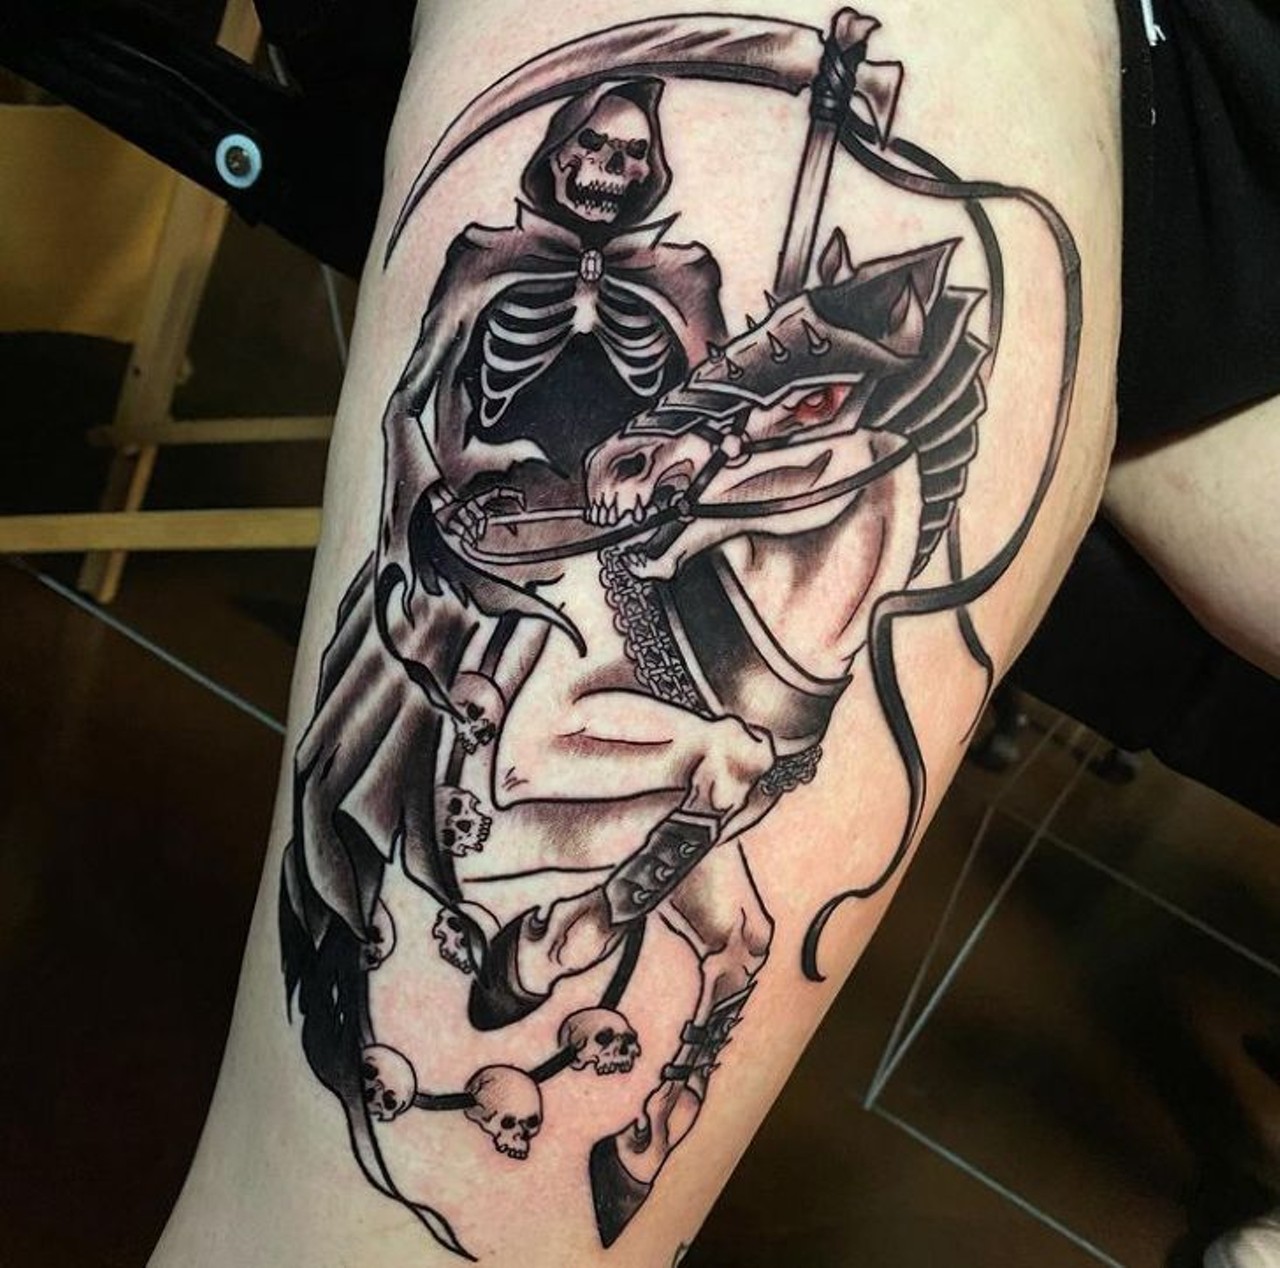 Dee Florian 
Homesick Tattoo Studio & Gallery
3050 Alafaya Trail, Oviedo, 407-542-3412
Dee Florian&#146;s ultra-detailed work is perfect for all blackwork or colorful tattoos. She&#146;s currently working out of Homesick Tattoo Studio & Gallery. 
Photo via deefloriantattoos/Instagram